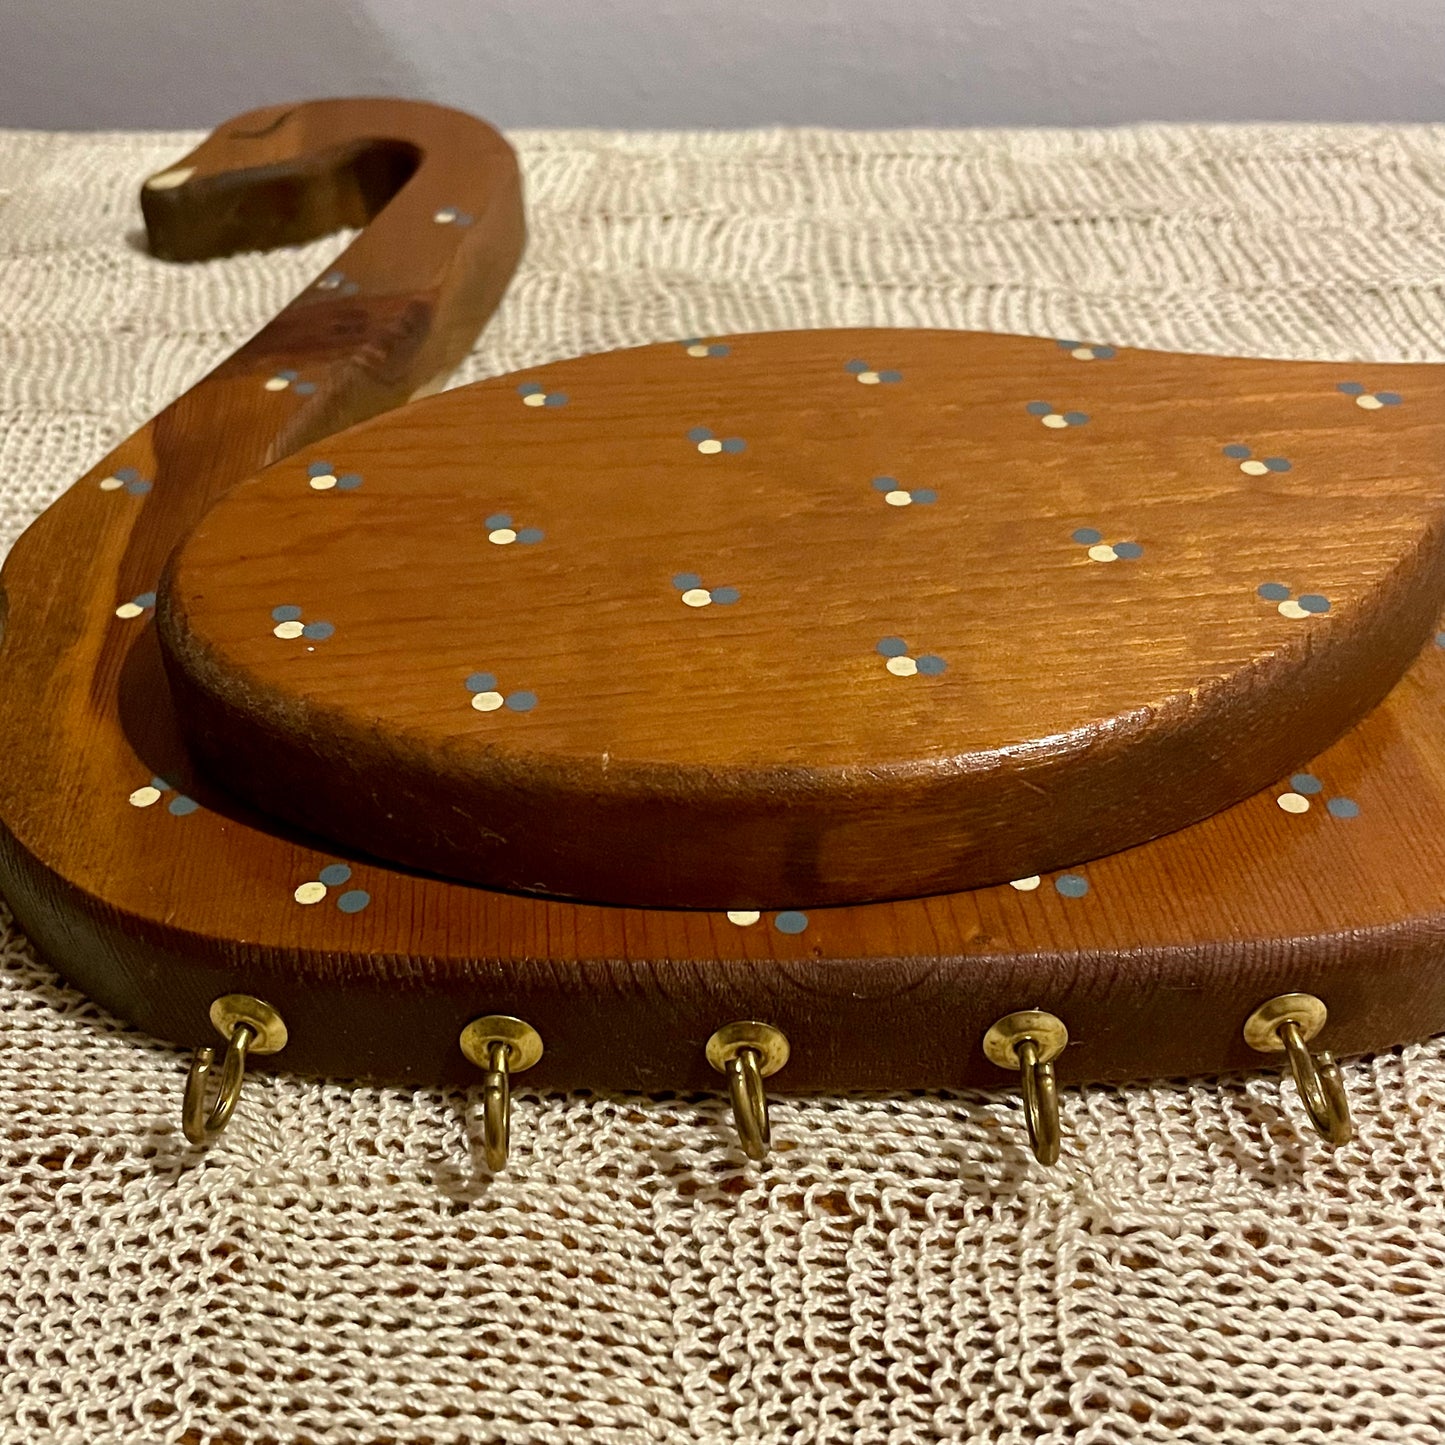 80s-90s Wooden Swan Mail and Key Organizer